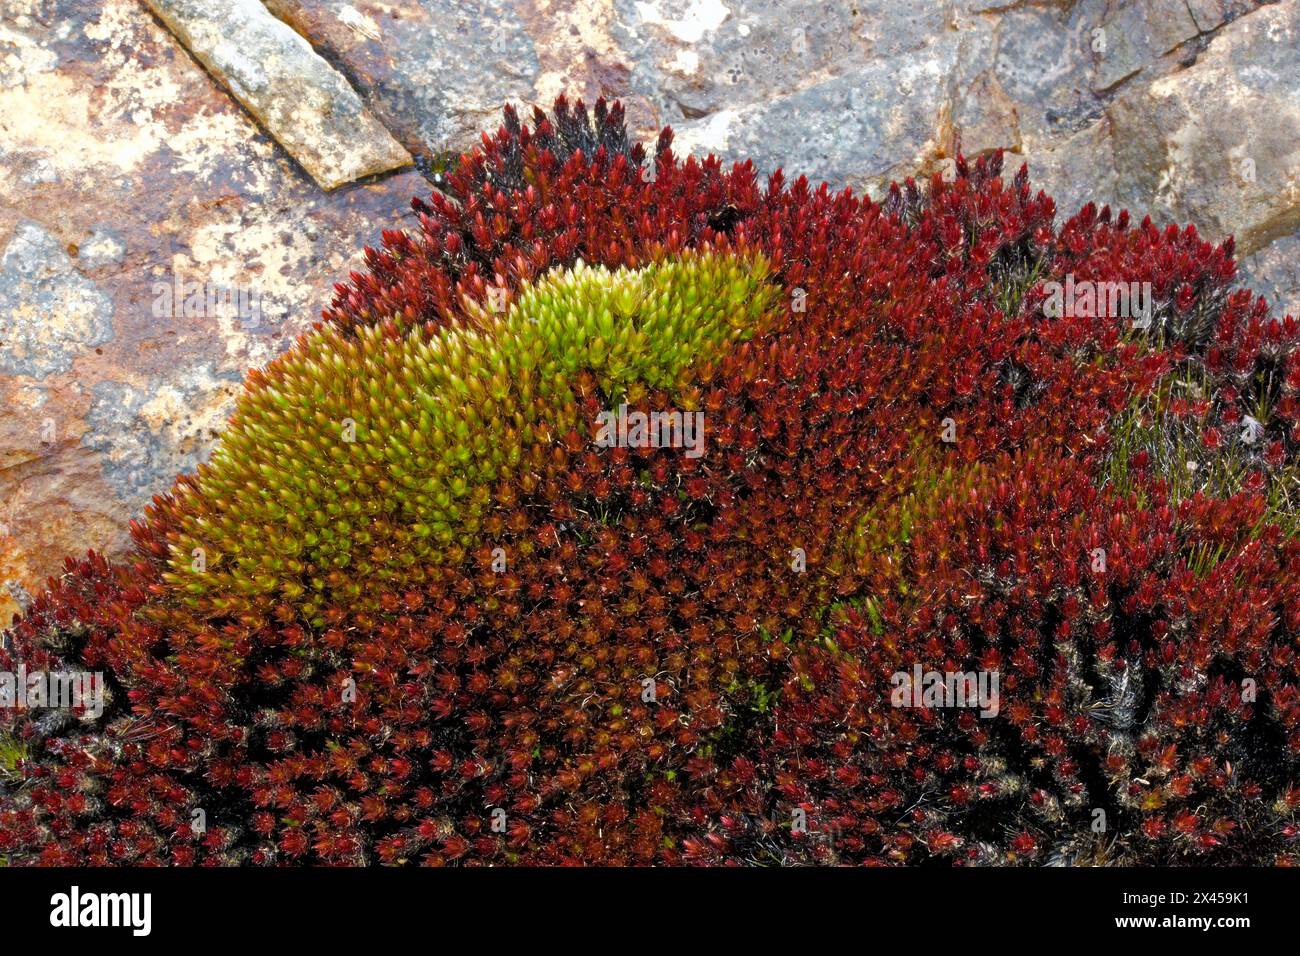 Bryum alpinum (Alpine Thread-moss) can be found on acidic or base-rich rocks subject to intermittent seepage. It is common in the north and west. Stock Photo